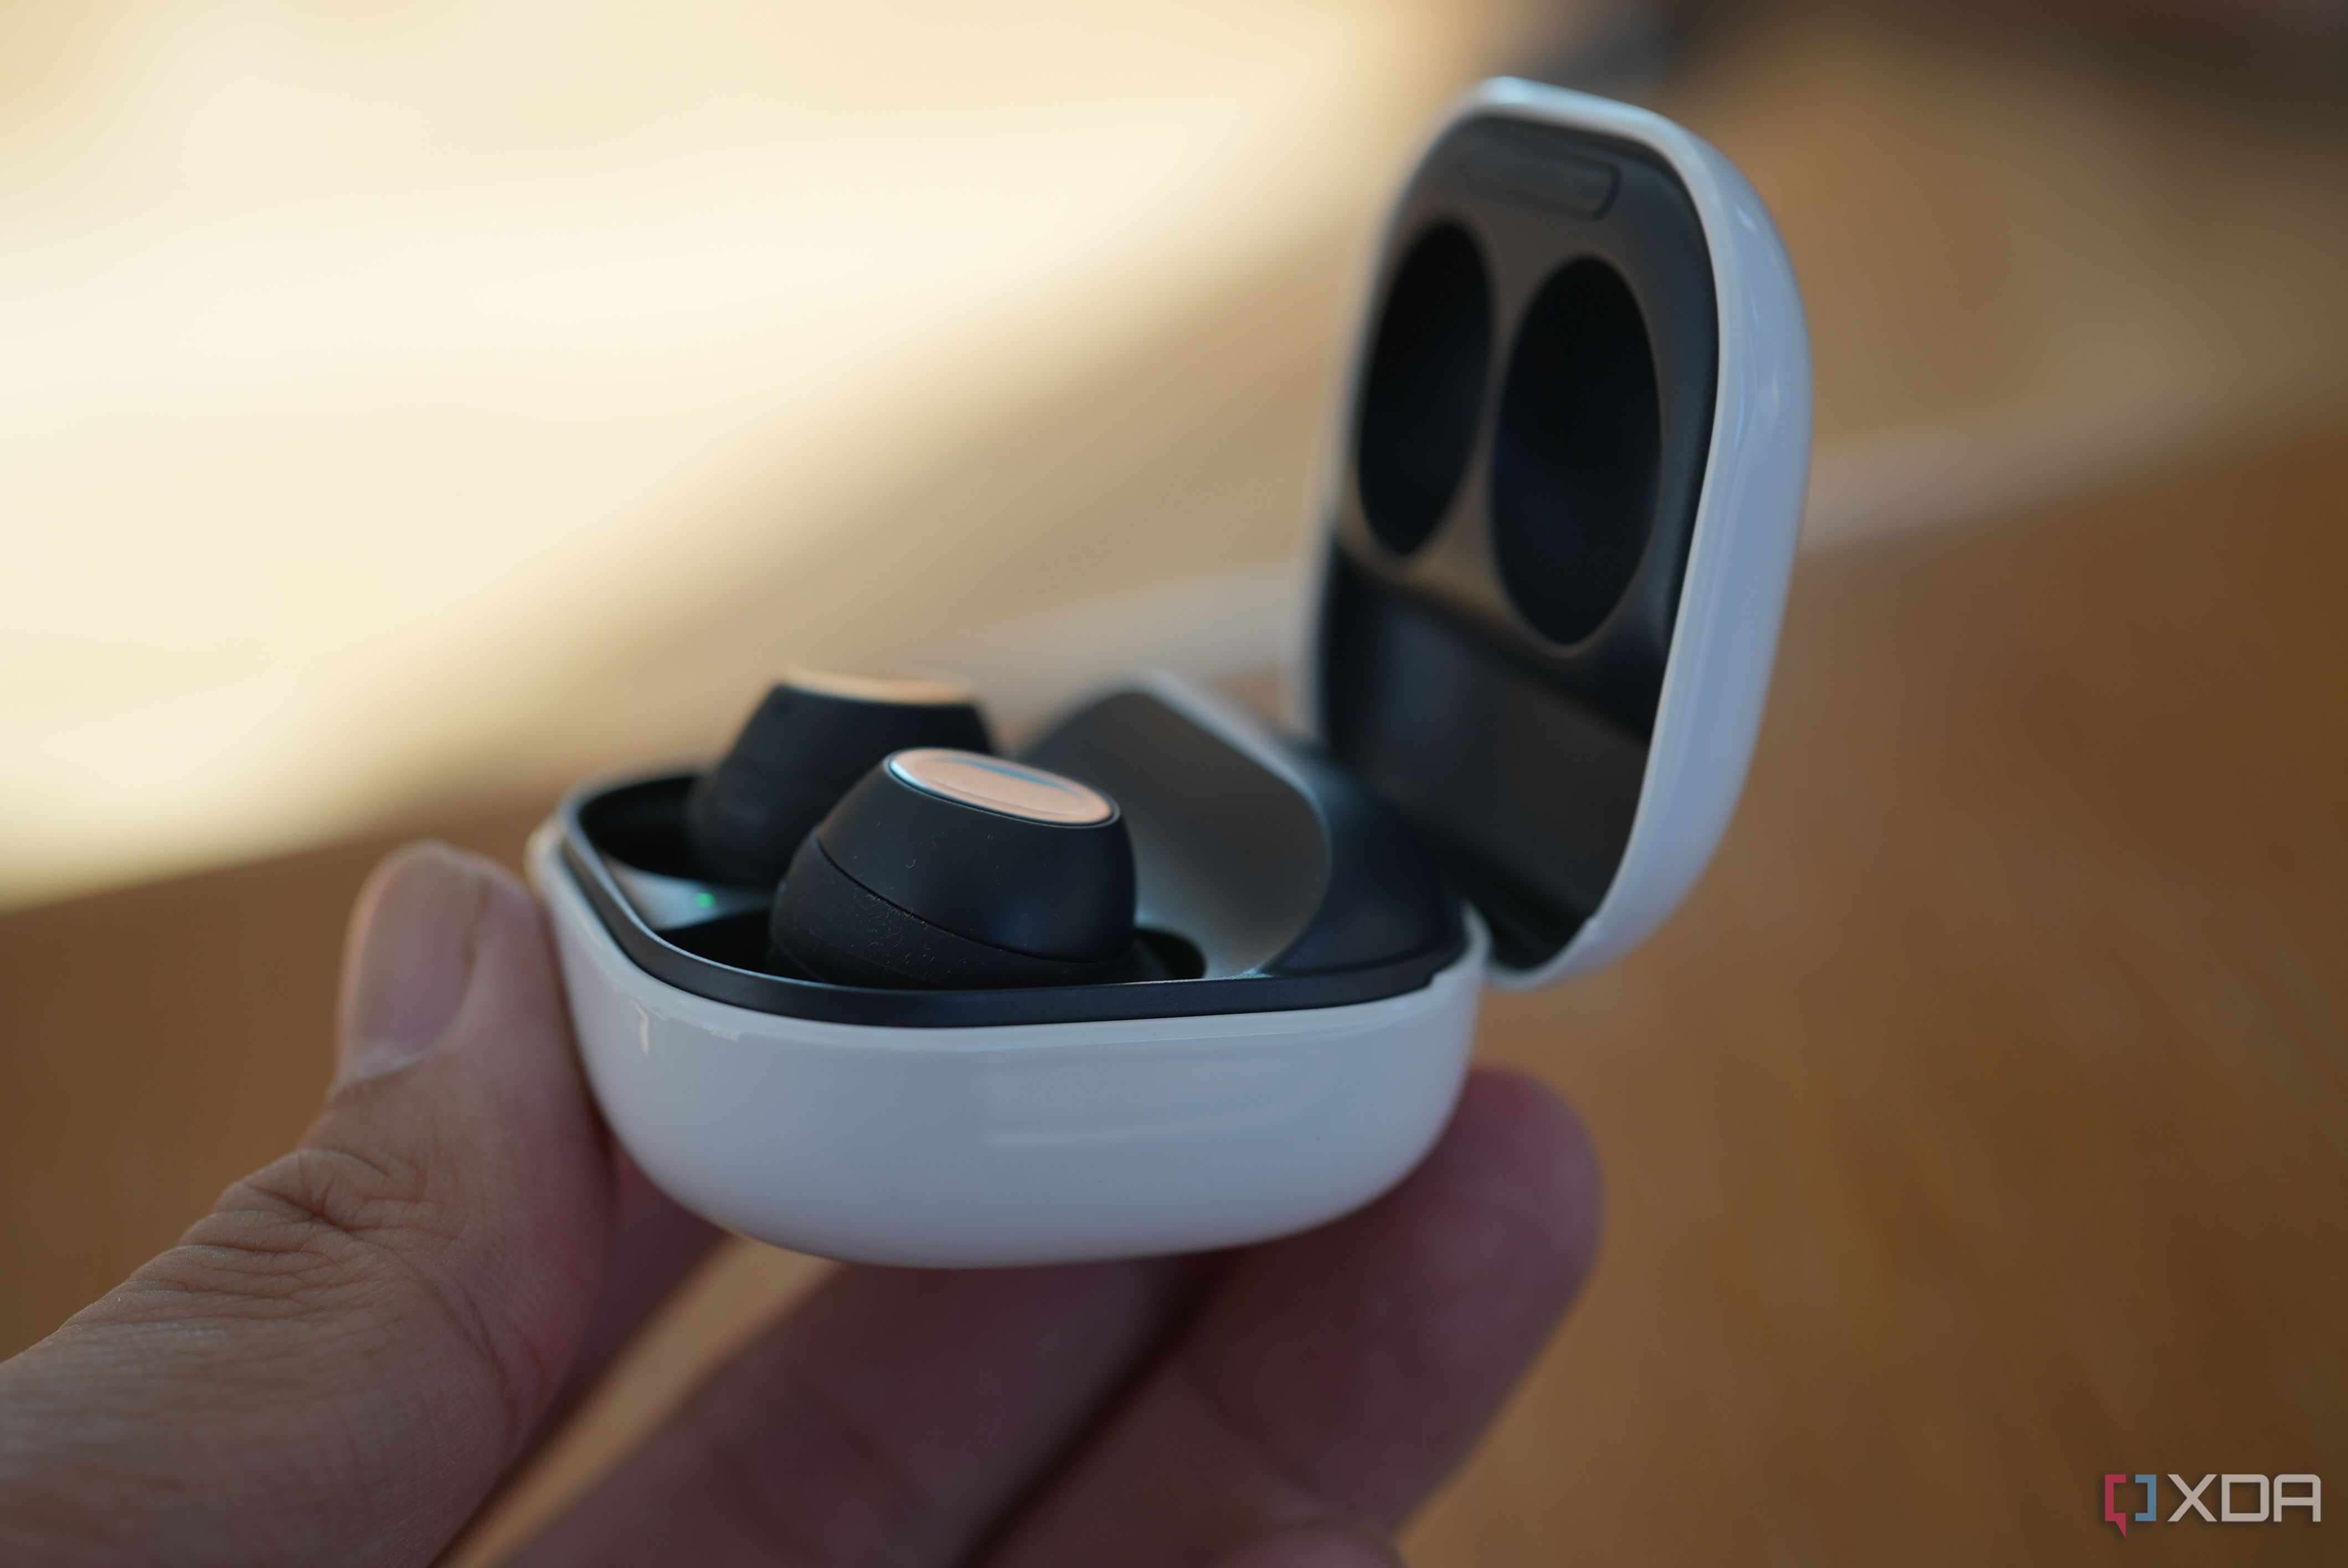 Samsung has launched the Galaxy Buds FE with ANC at $99